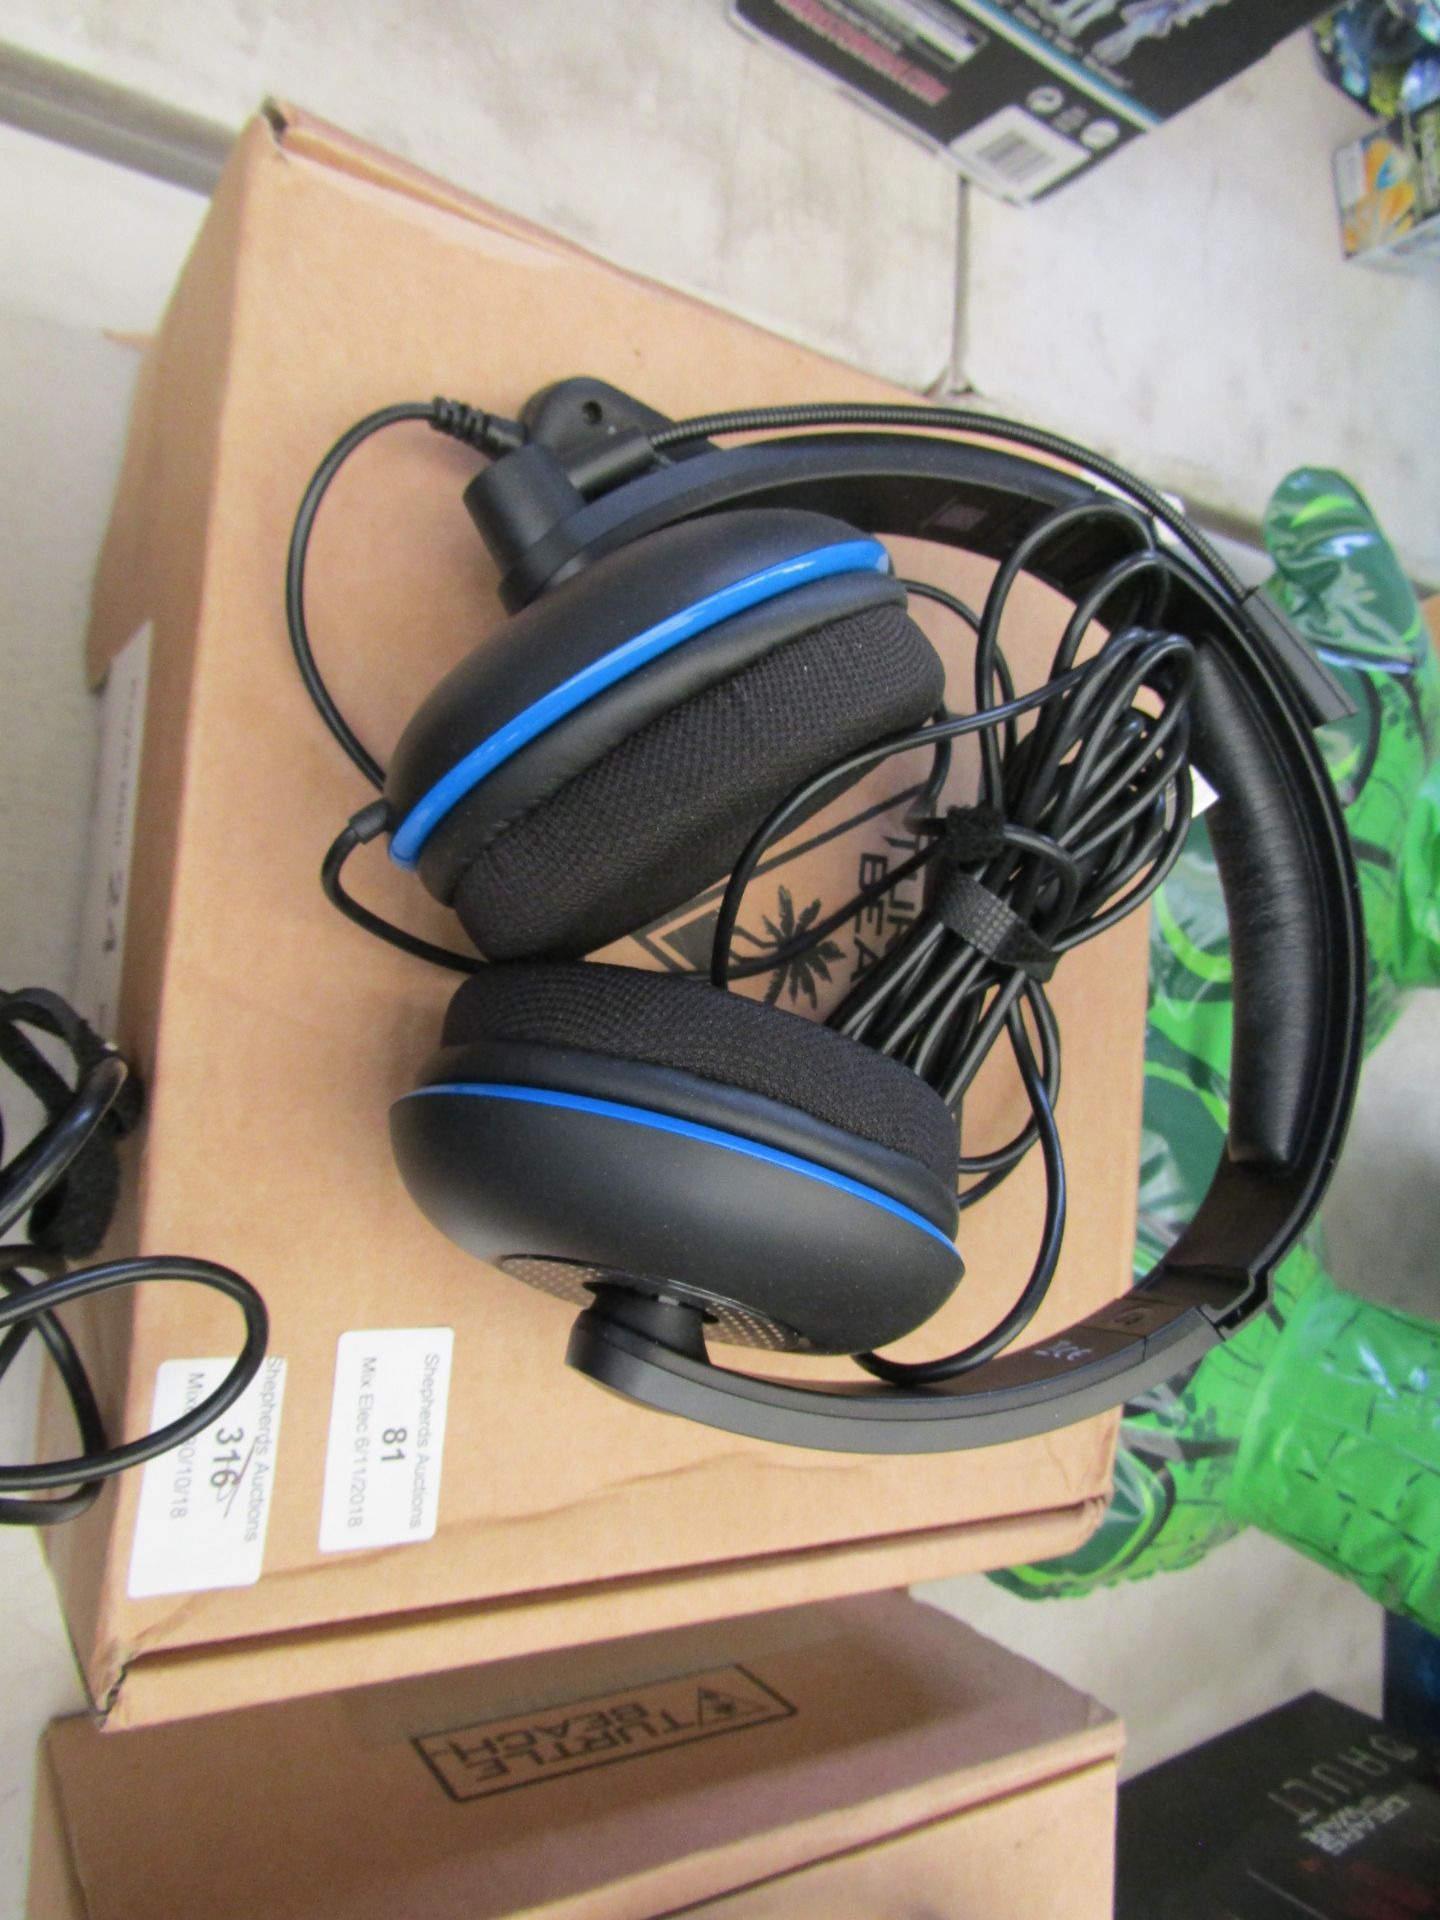 Turtle Beach ear force P12 ear phones. Unchecked and boxed.